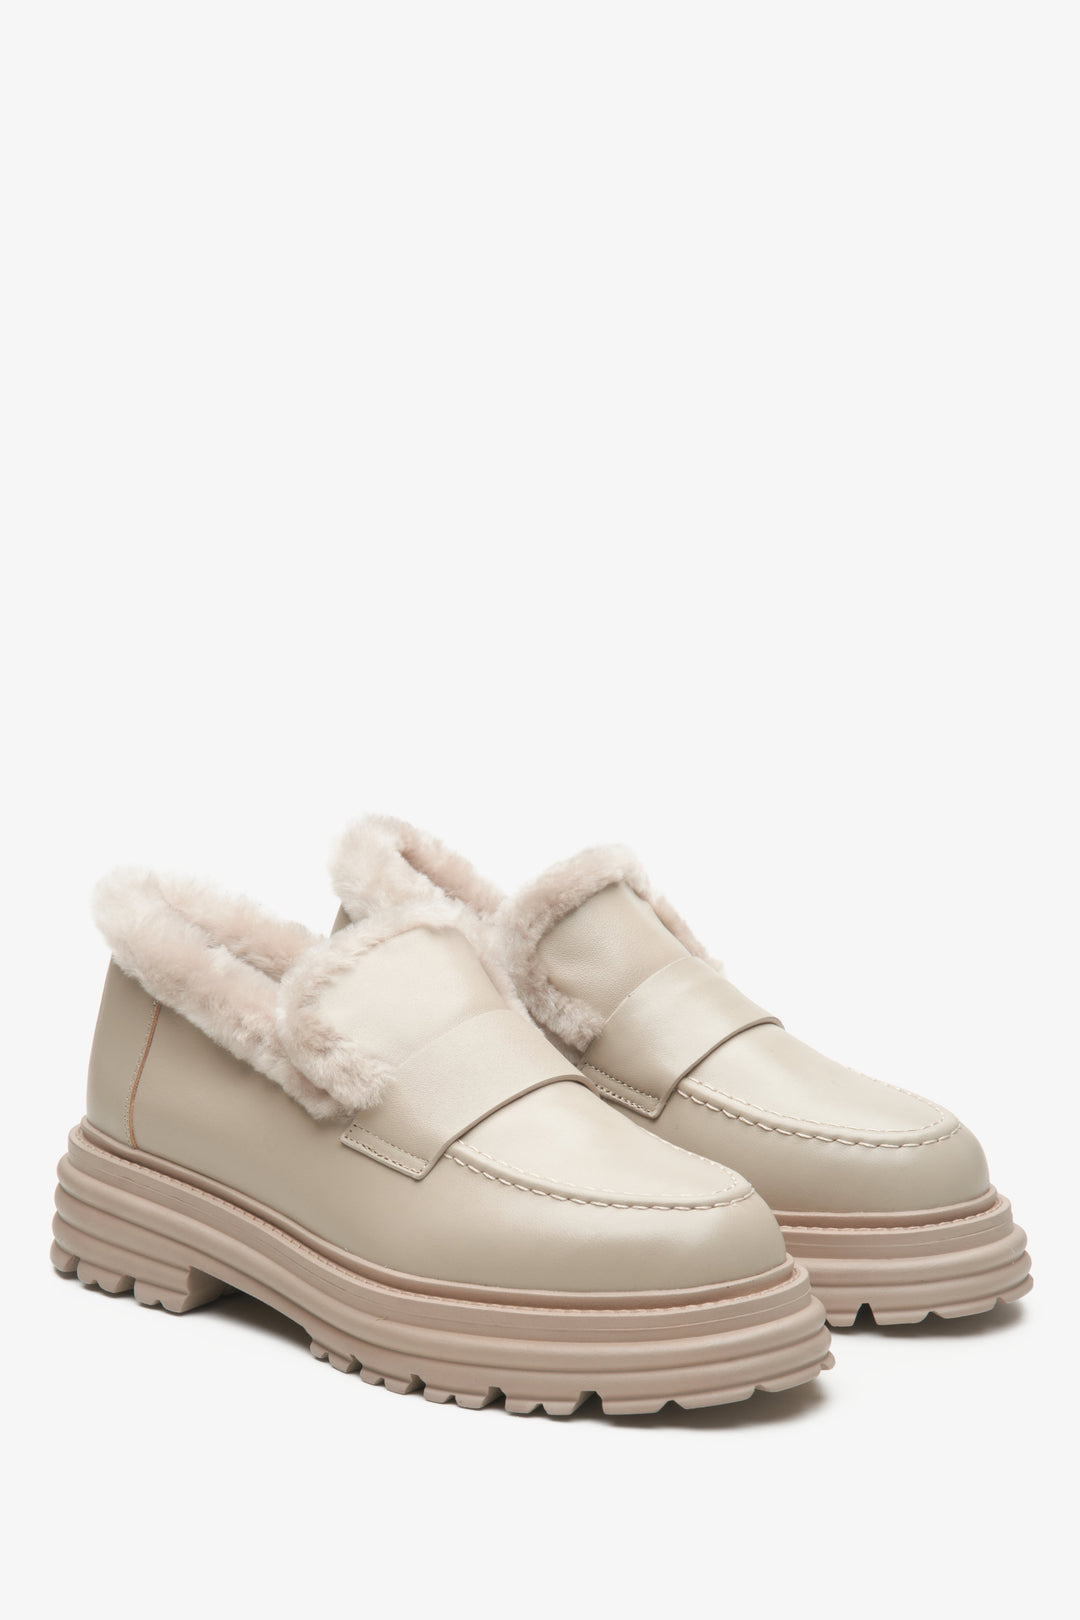 Winter women's moccasins in beige with fur lining by Estro.